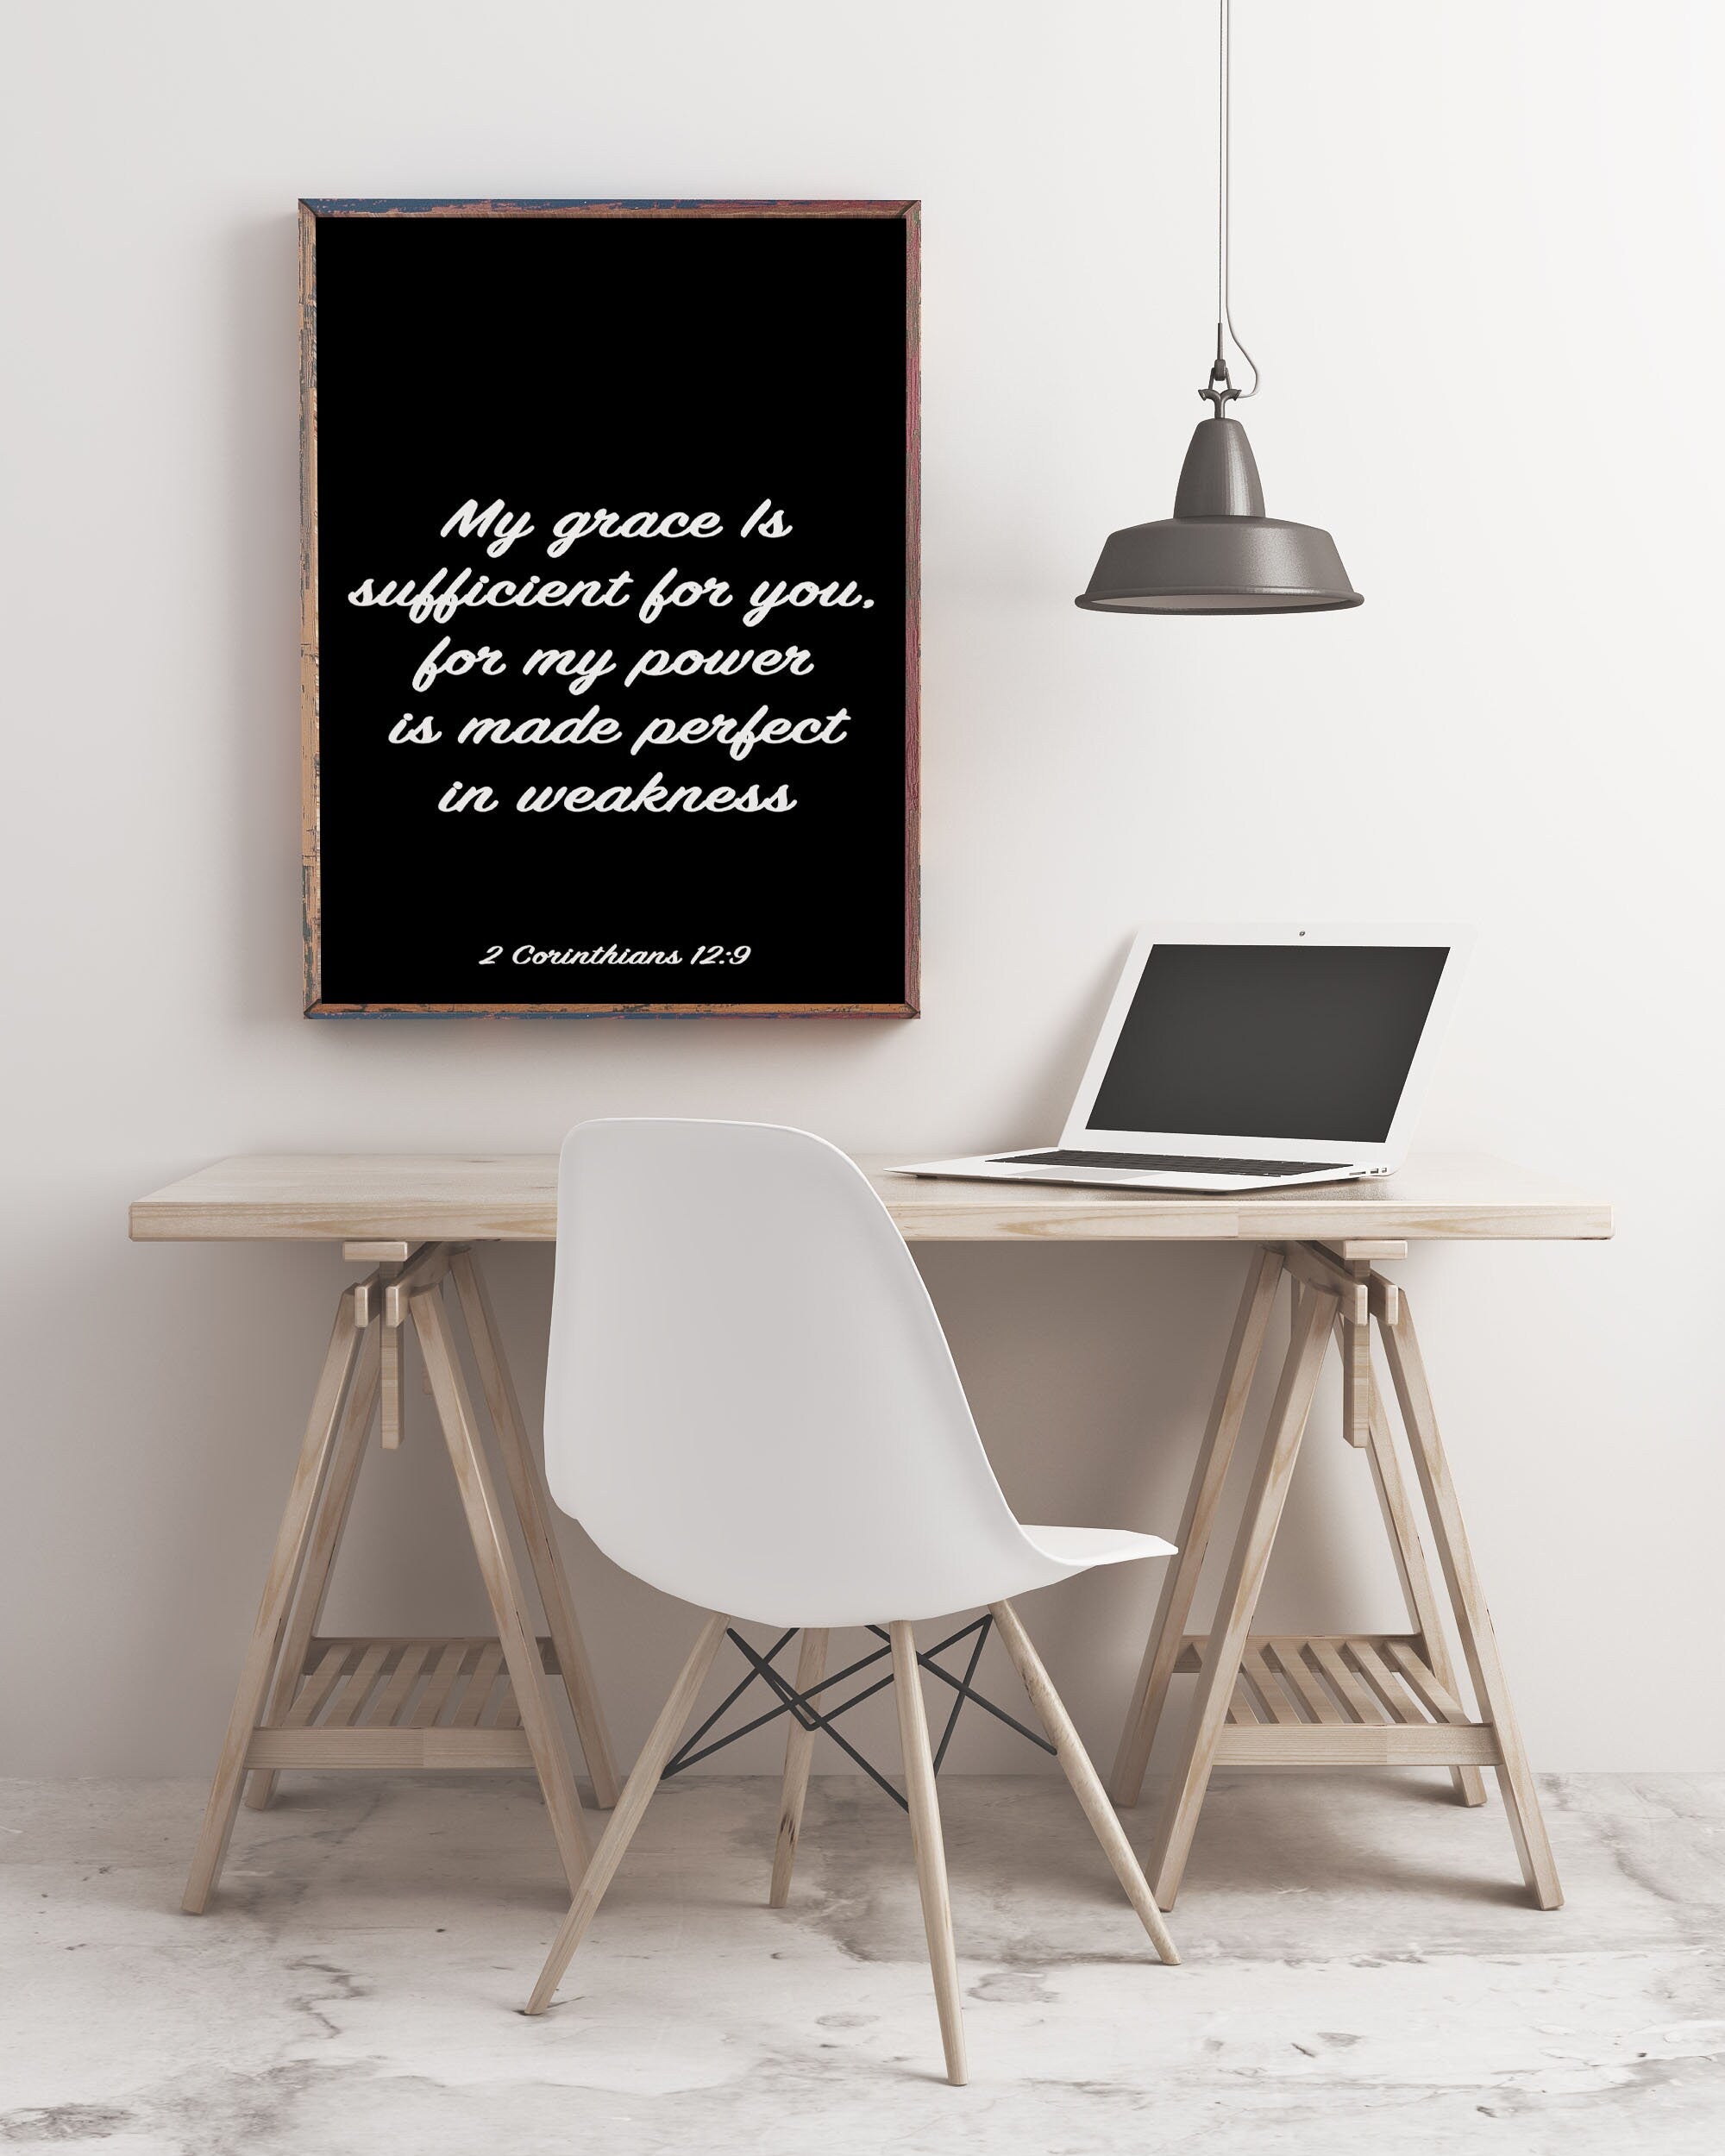 2 Corinthians 12:9 Quote Print, My Grace is Sufficient Wall Art in Black & White